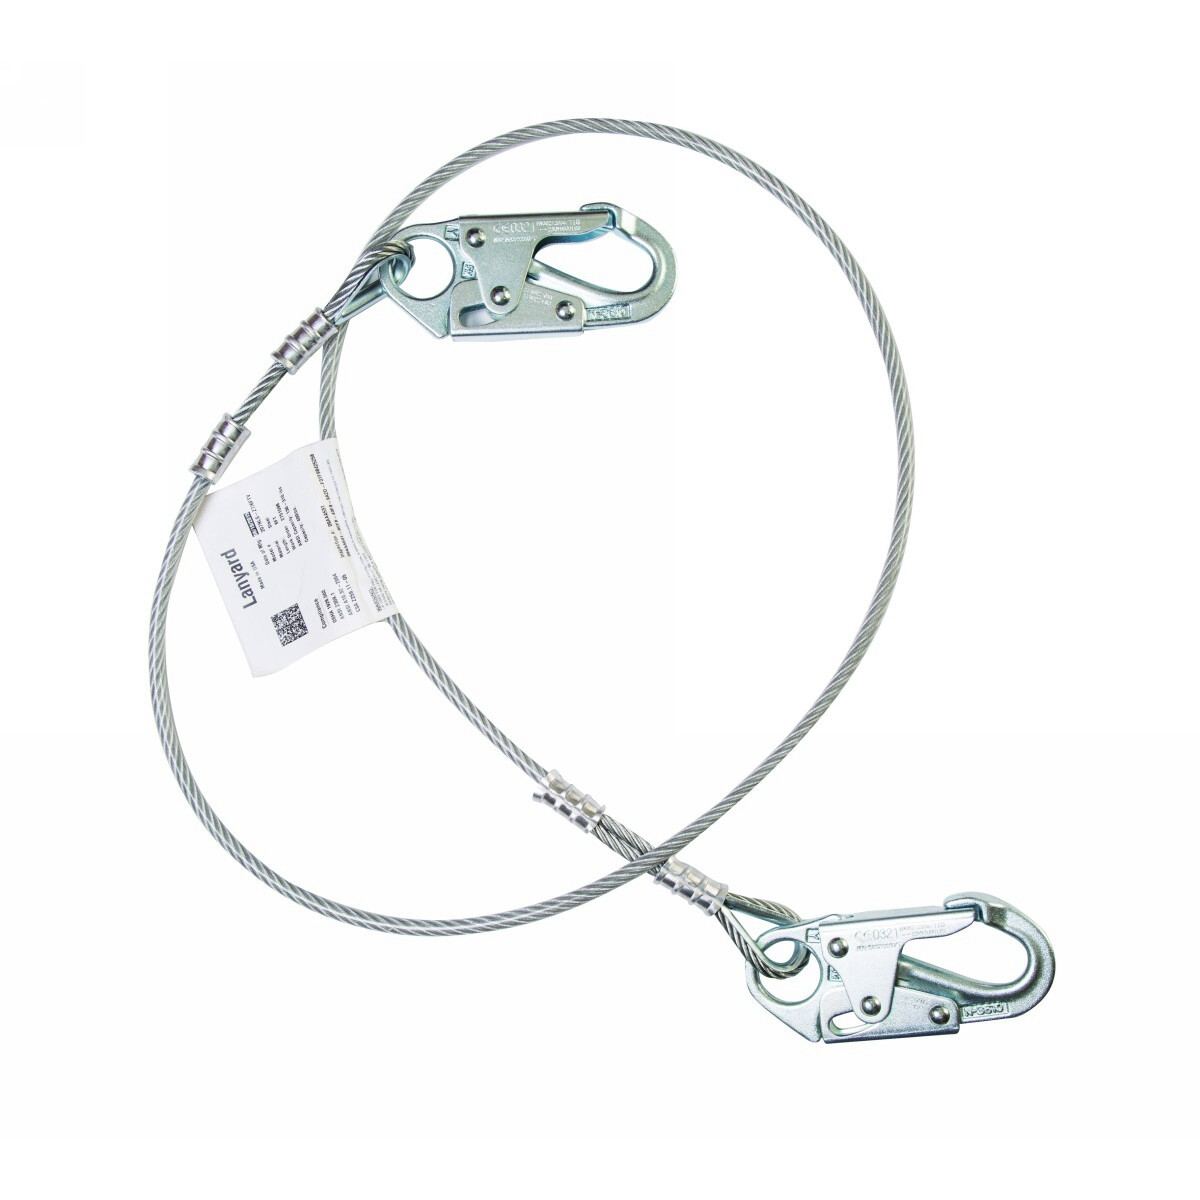 Honeywell Miller® 6' Vinyl Coated Wire Rope Positioning Lanyard With Locking Snap Hook Harness Connector